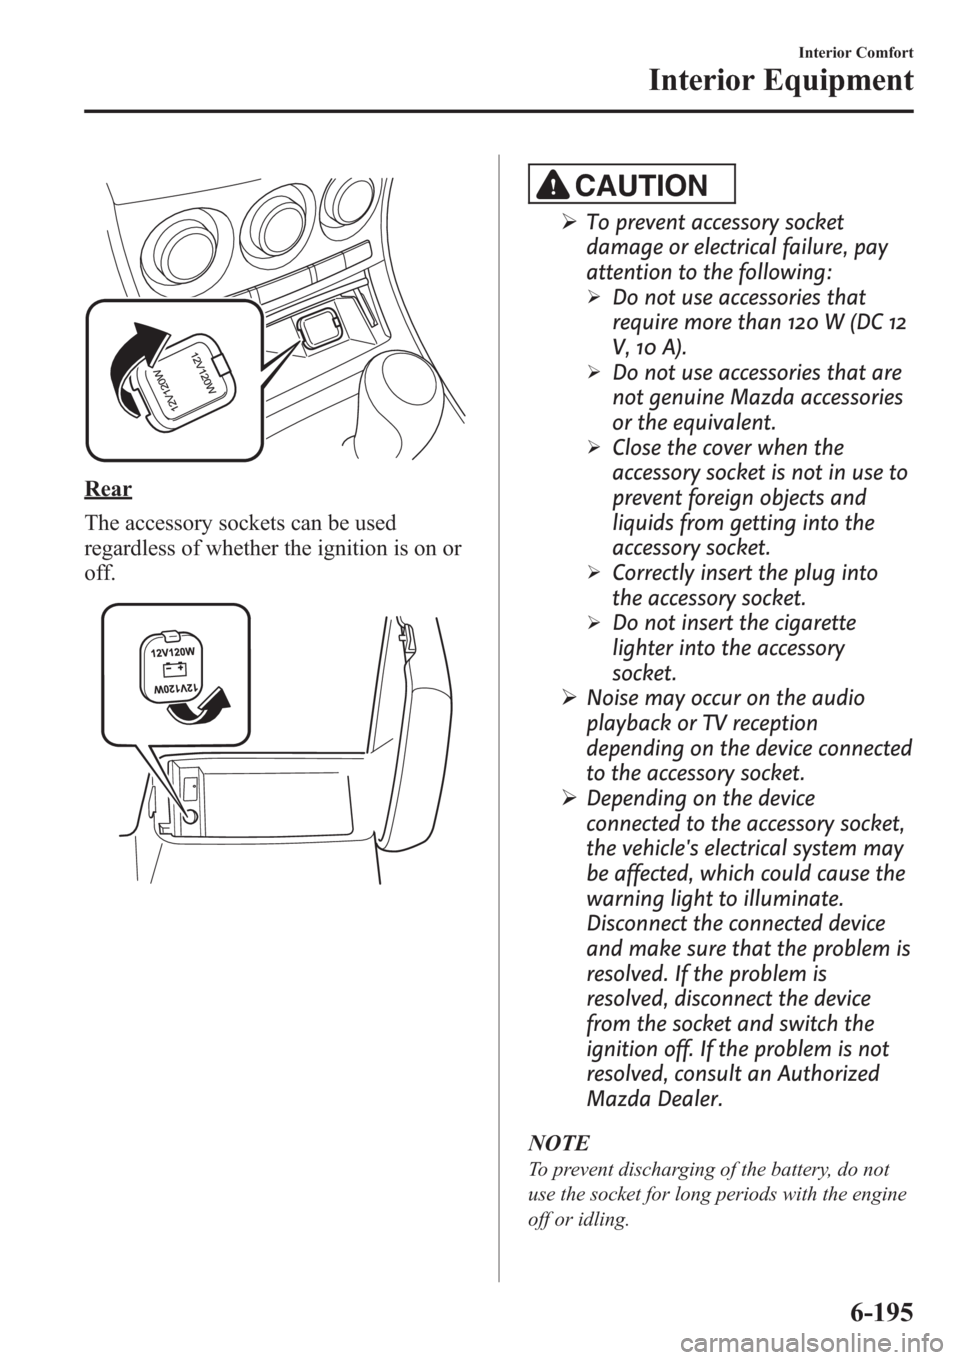 MAZDA MODEL 3 HATCHBACK 2013  Owners Manual (in English) Rear
The accessory sockets can be used
regardless of whether the ignition is on or
off.
CAUTION
ØTo prevent accessory socket
damage or electrical failure, pay
attention to the following:
ØDo not use